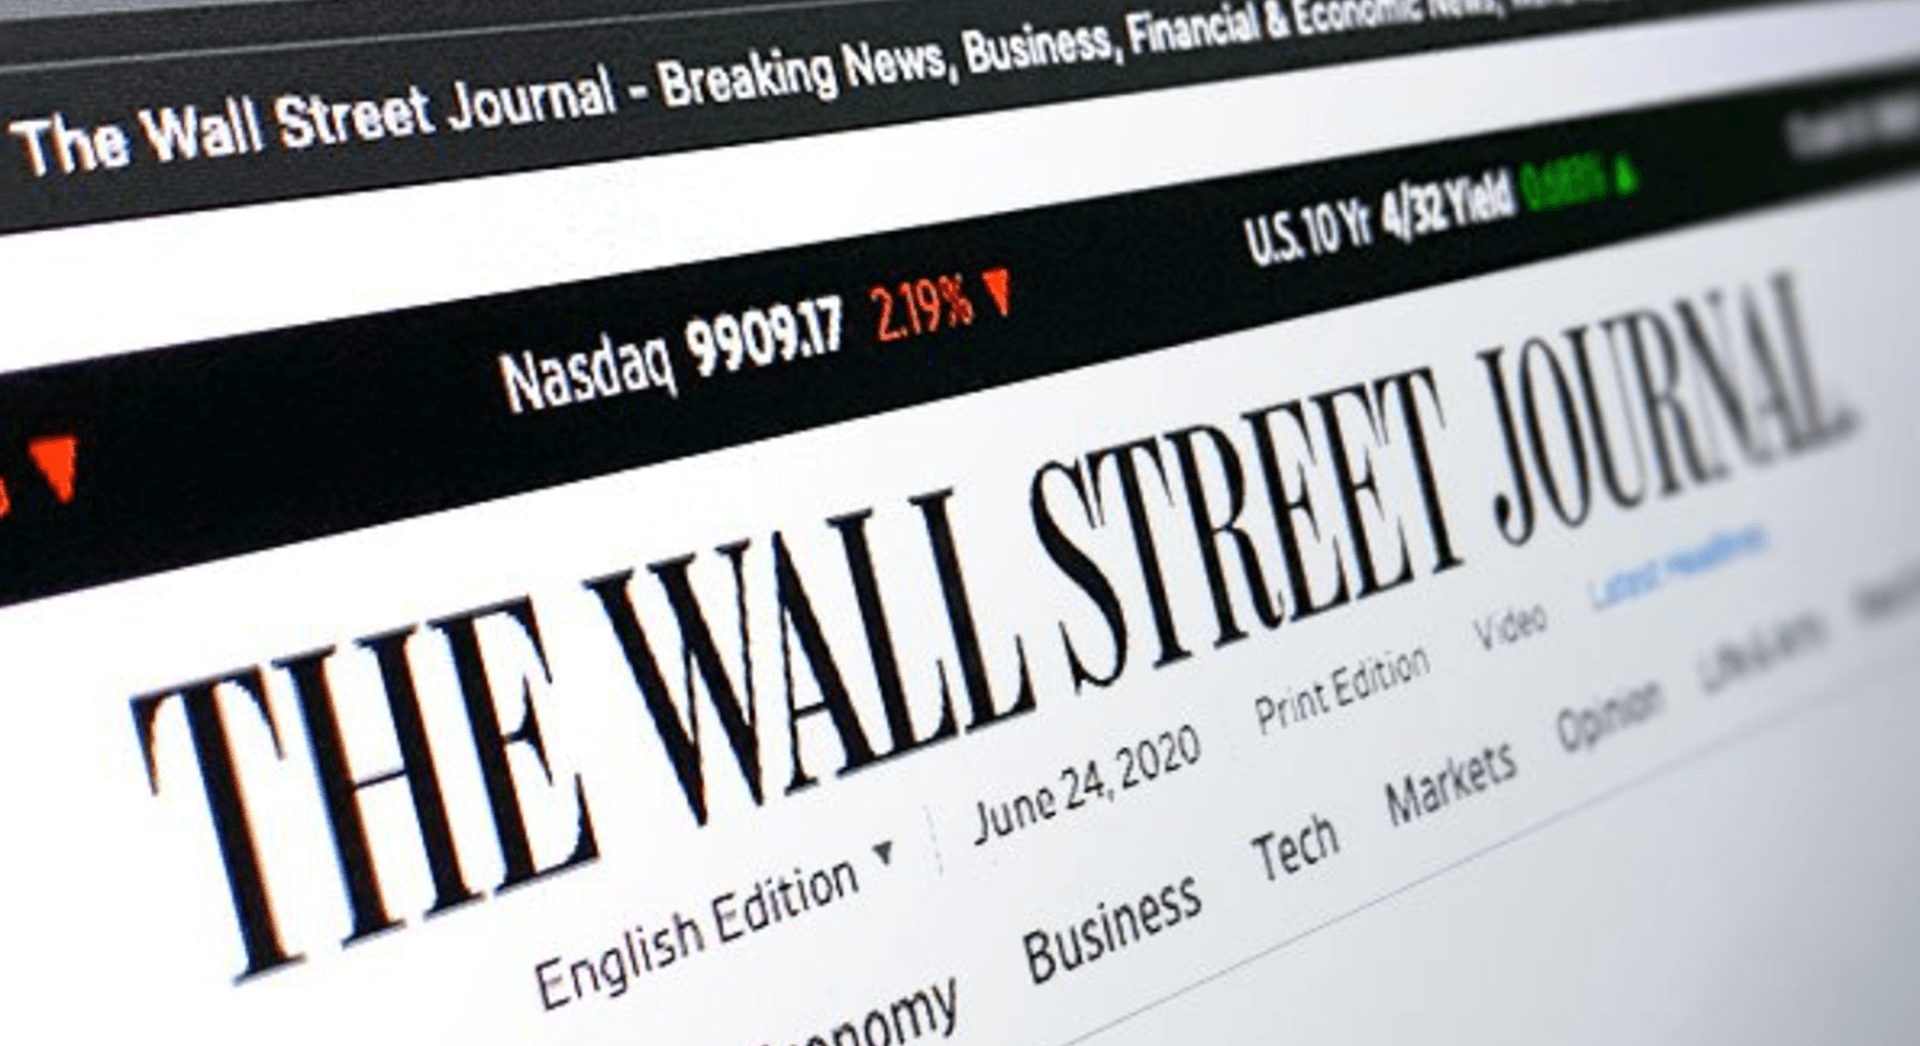 Discounts for educators and students on The Wall Street Journal subscriptions.